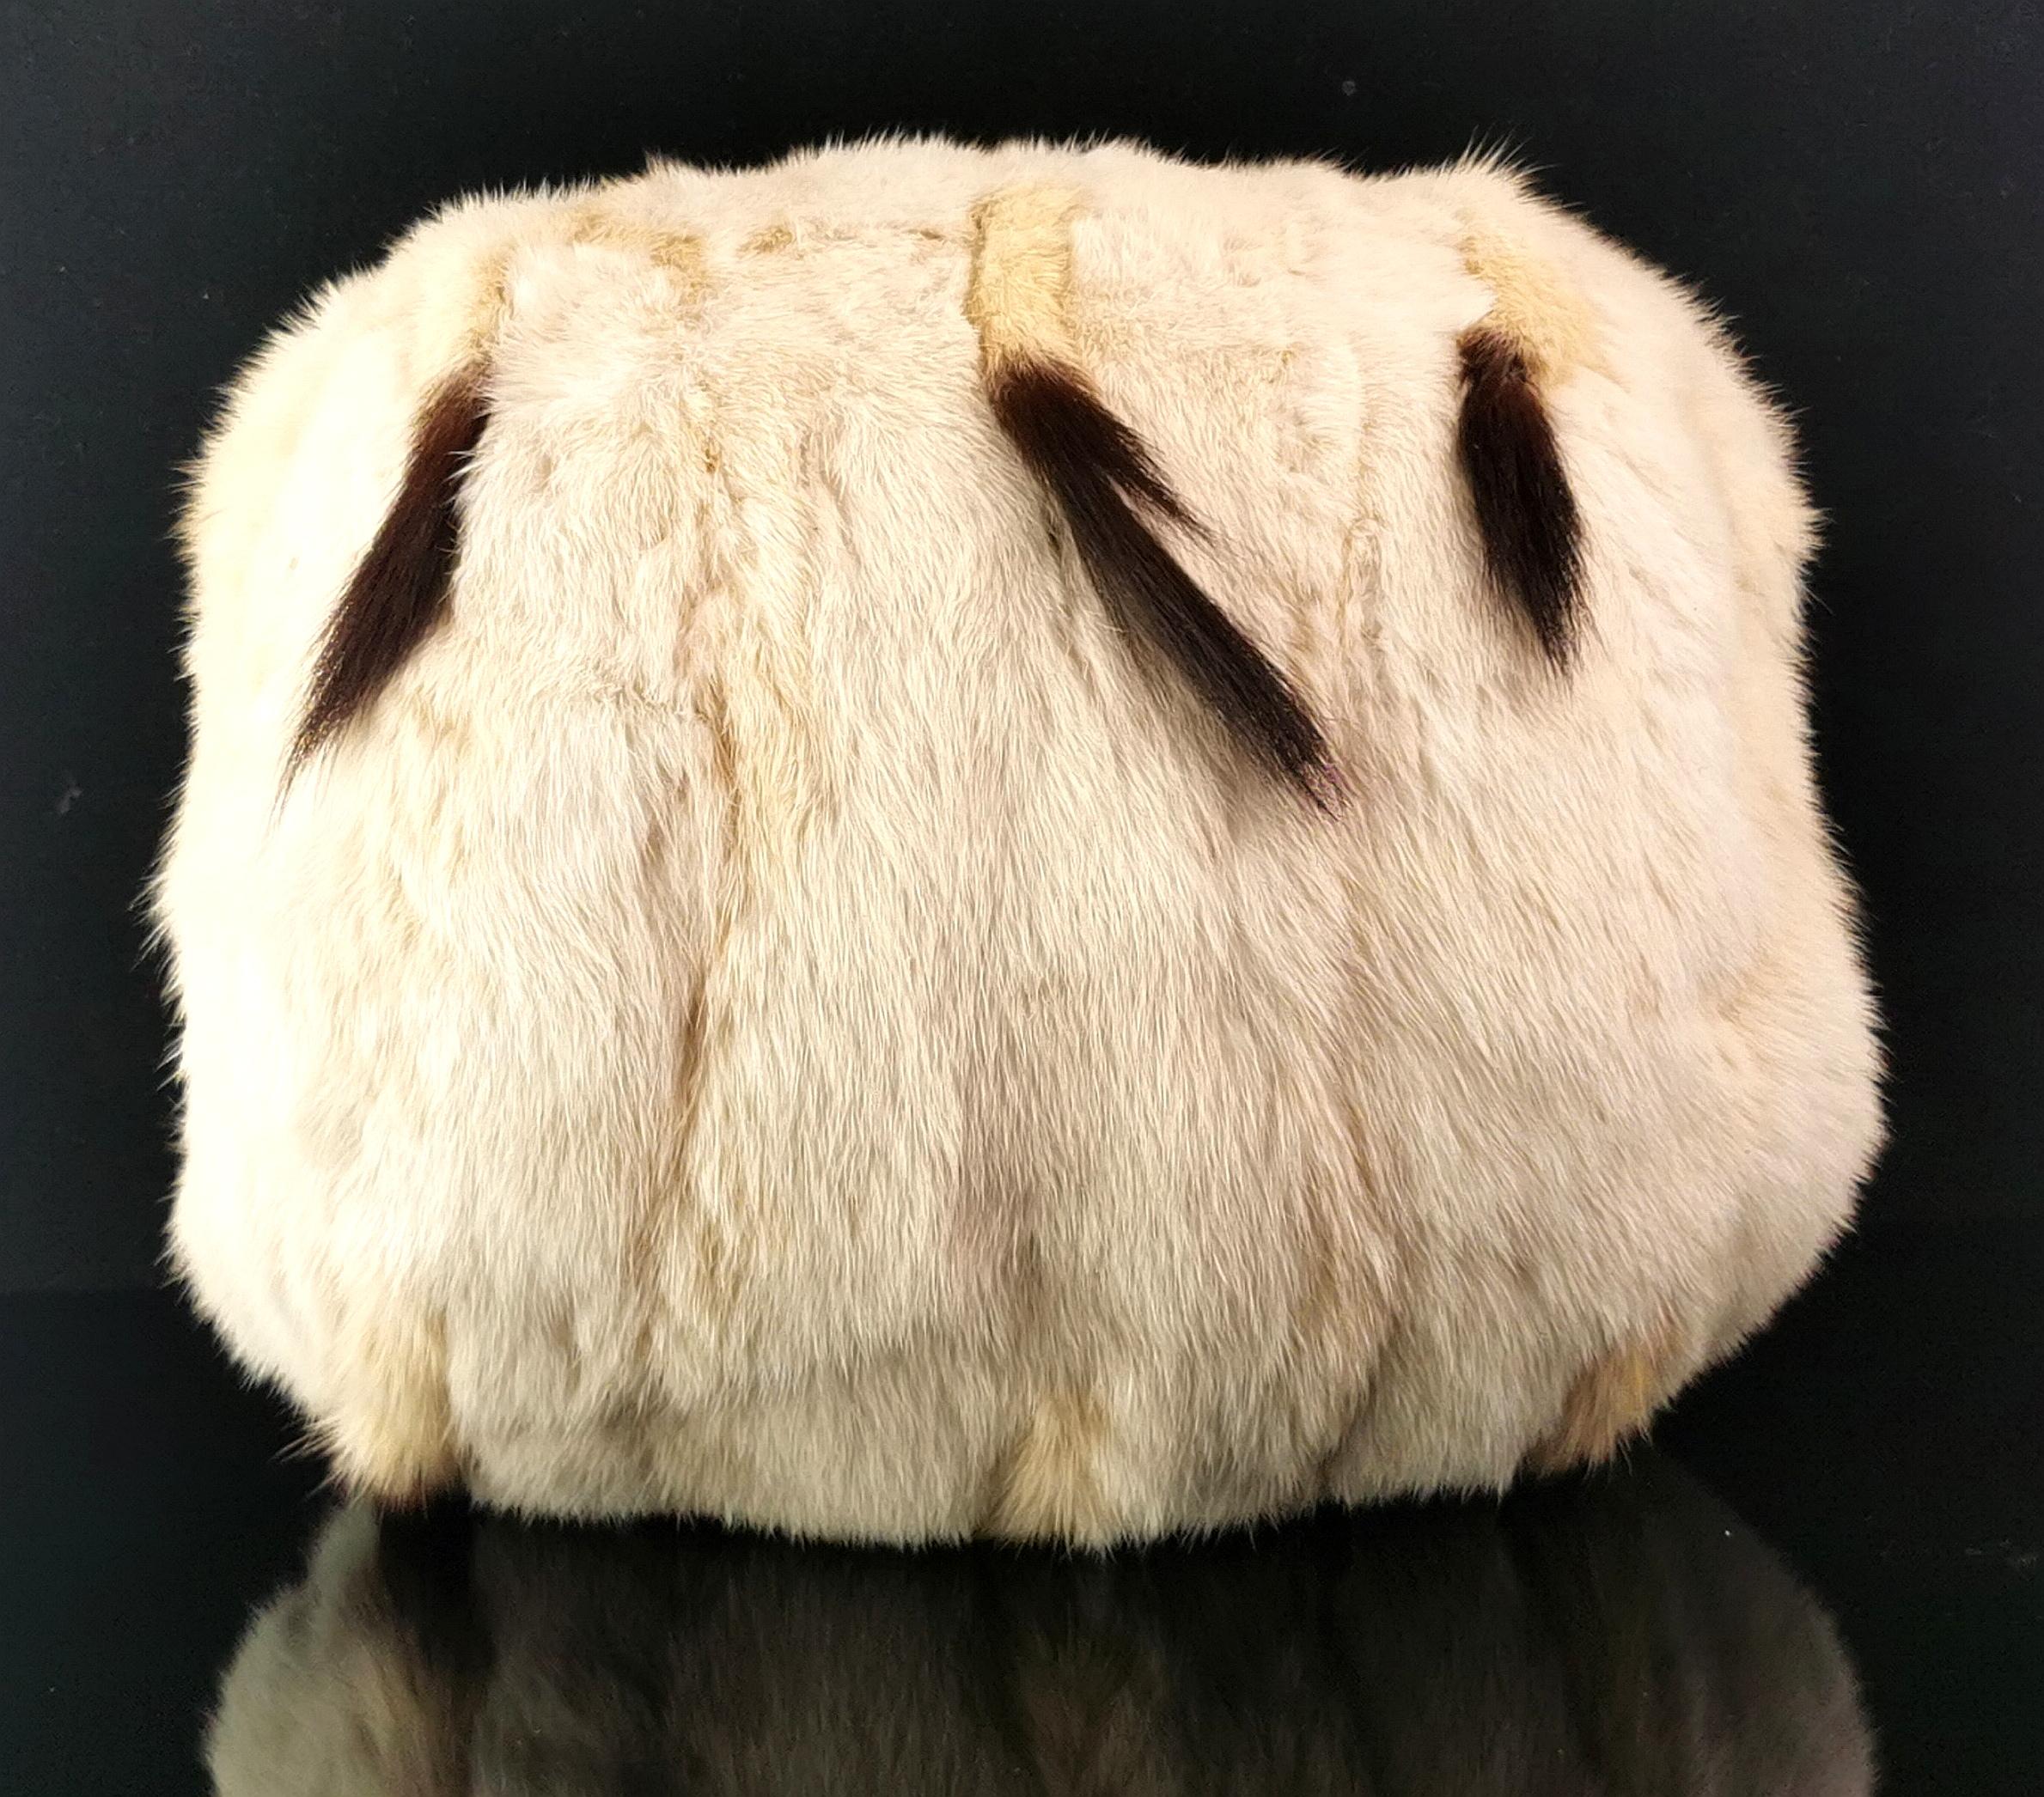 A truly beautiful antique ermine muff.

Late Victorian era, ermine being the winter coat of the stoat it was usually reserved for Royalty and the higher classes, due to the rarity and cost.

This gives the muff a very regal feel as it is synonymous